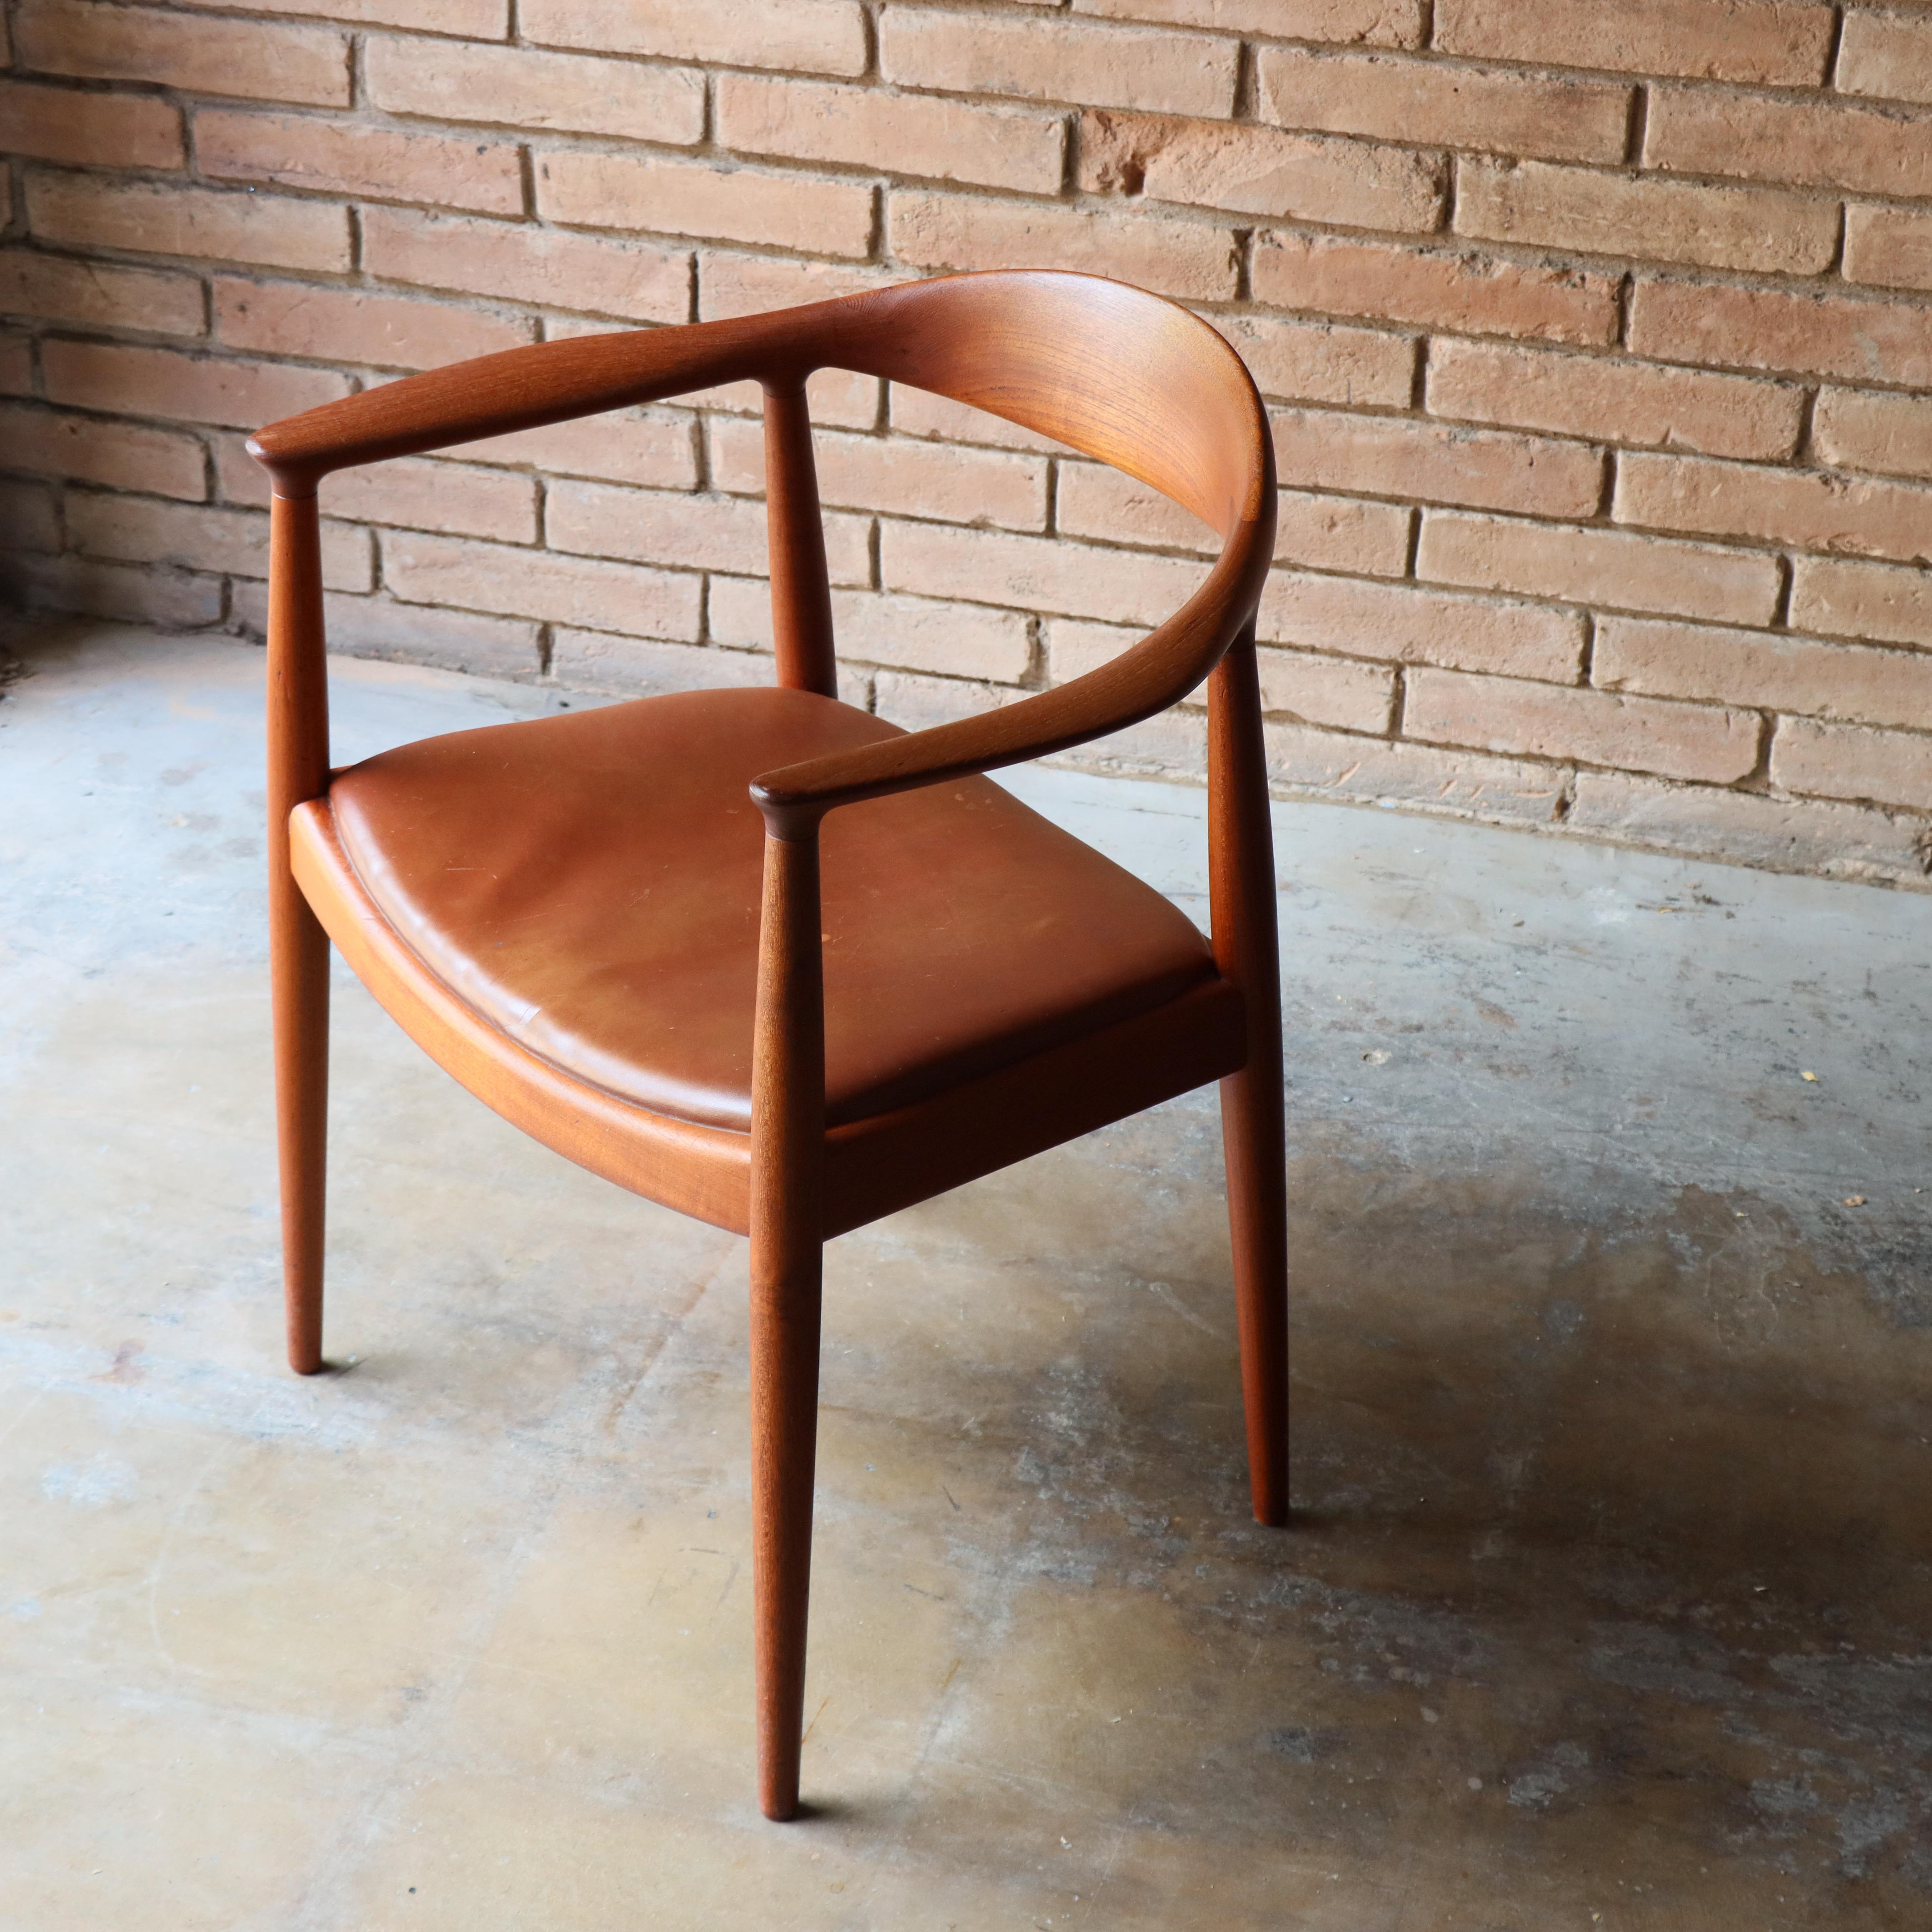 An early “round” chair or “Kennedy” chair designed by Hans Wegner for Johannes Hansen. This example is executed in teak and retains its vintage cognac leather. Model JH 503. Example is fully marked with early Johannes Hansen branding. 

“A chair,”